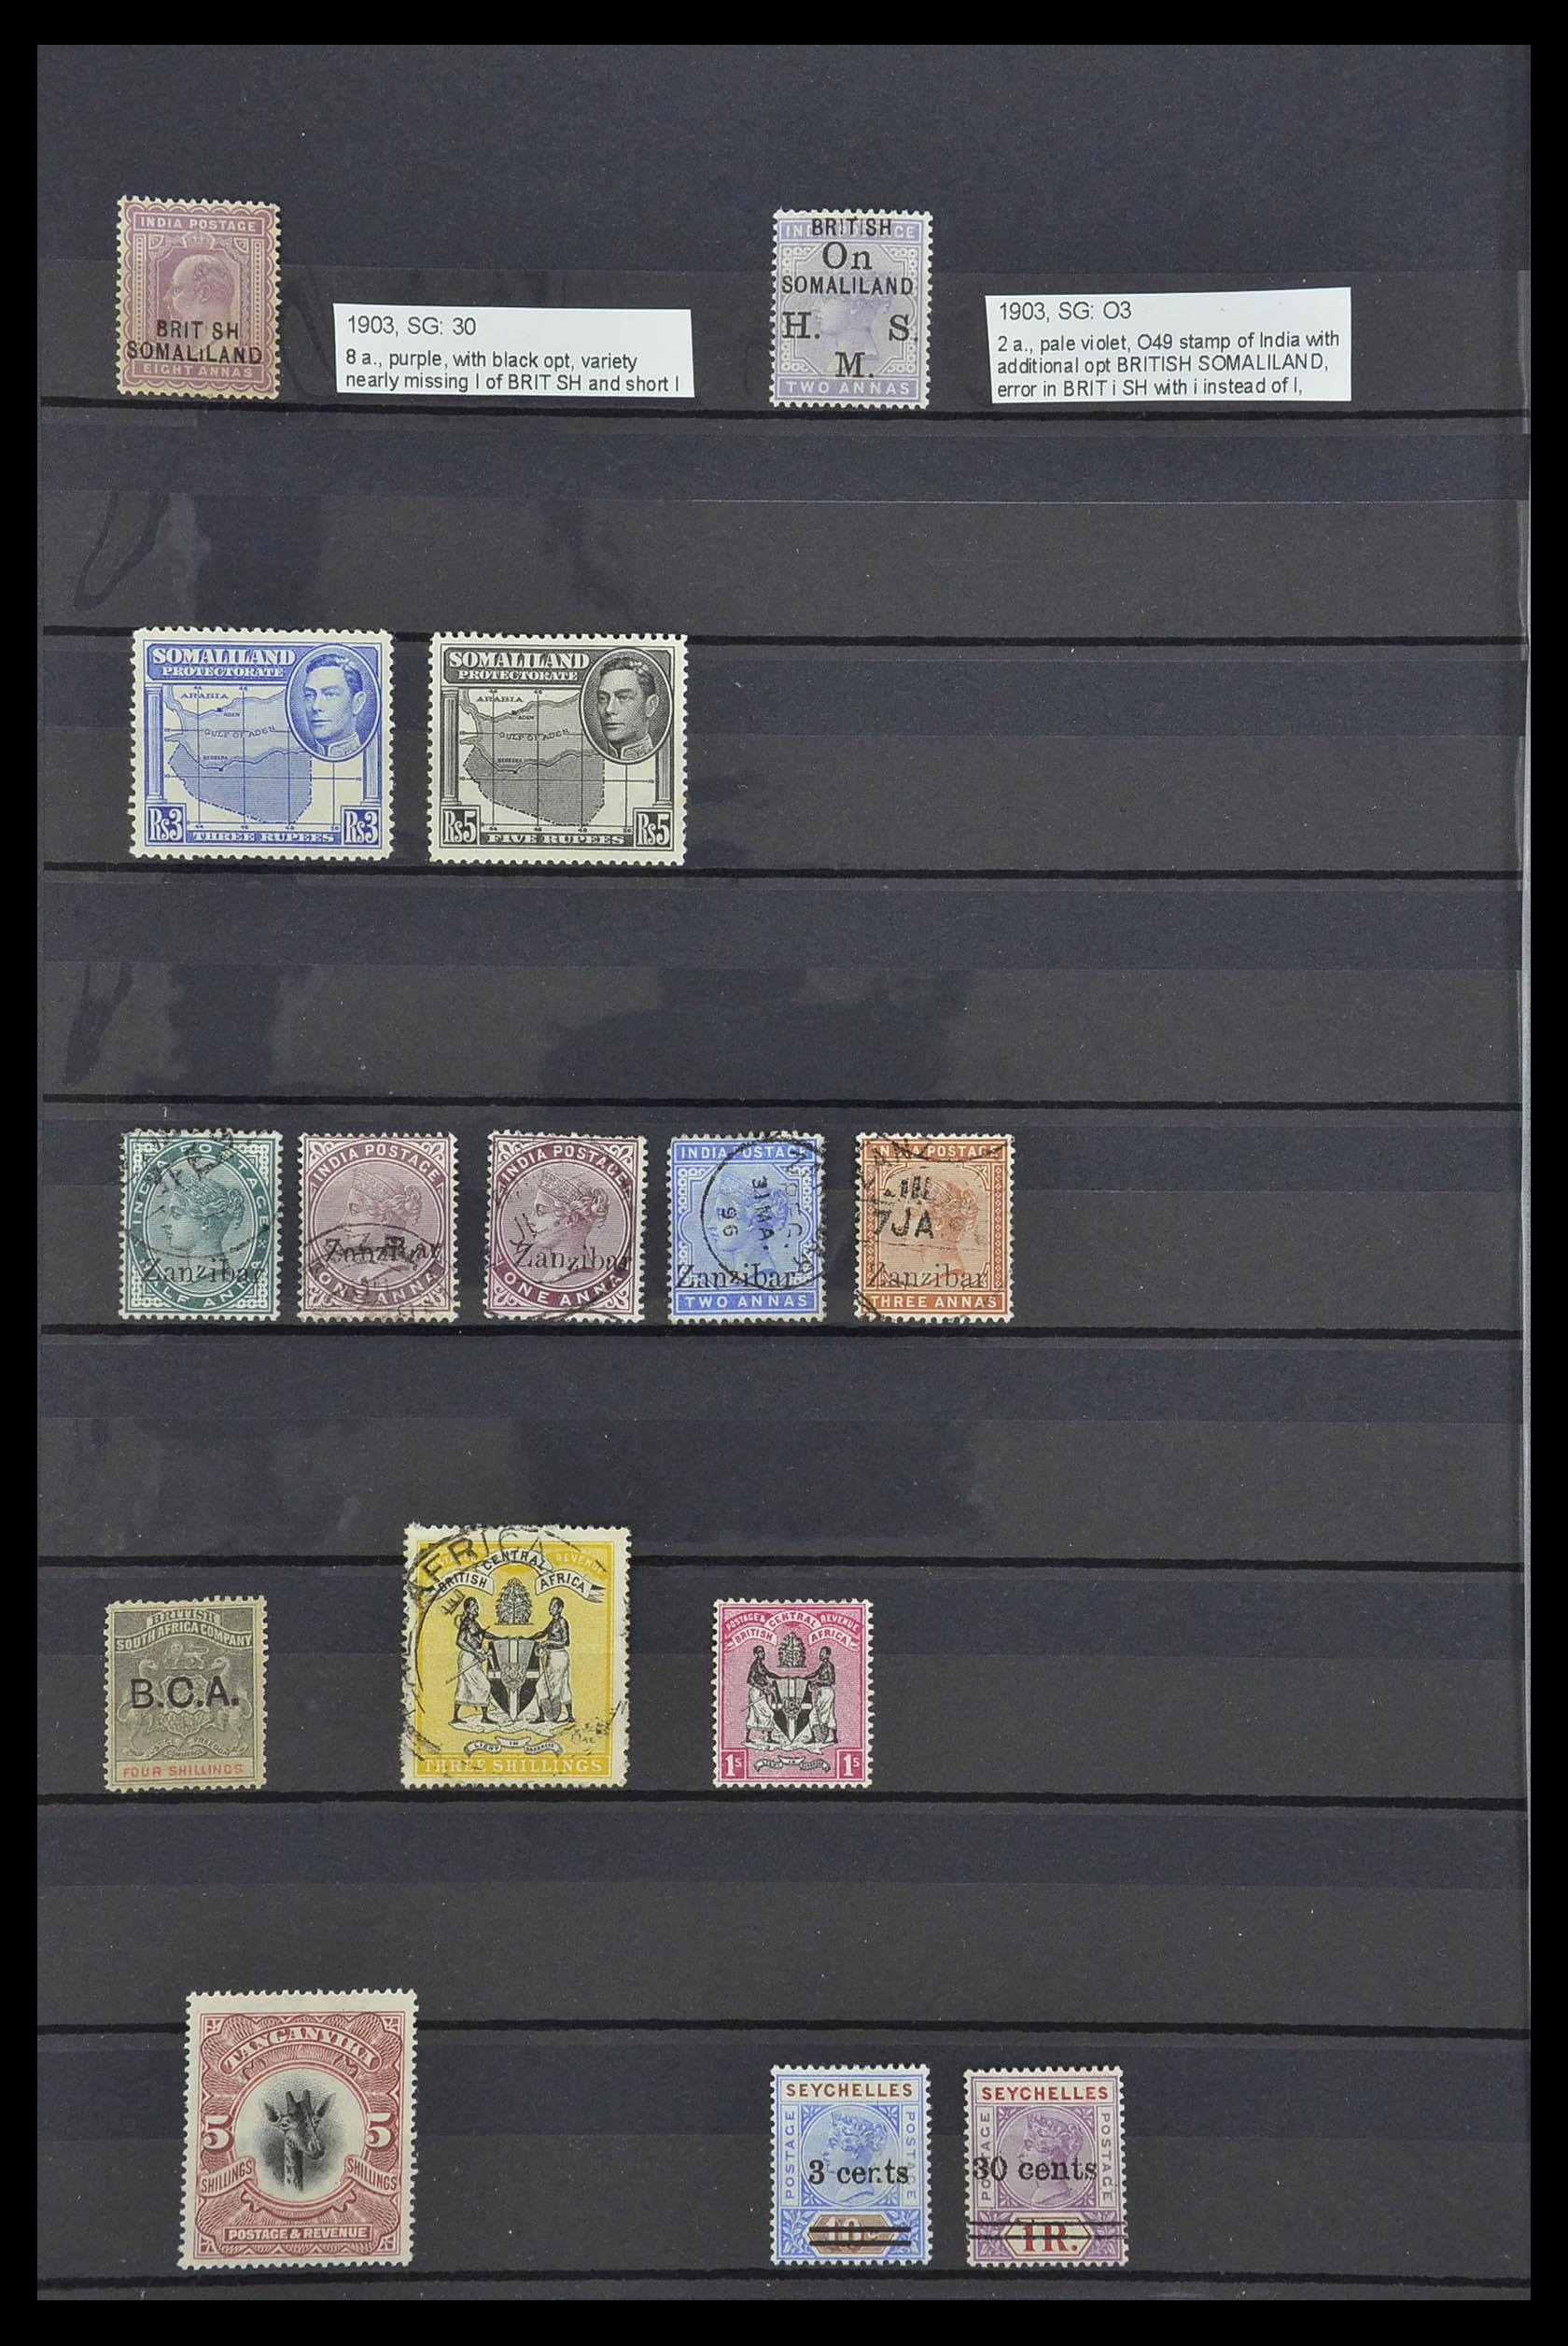 33640 058 - Stamp collection 33640 British Commonwealth key items 1853-1953.